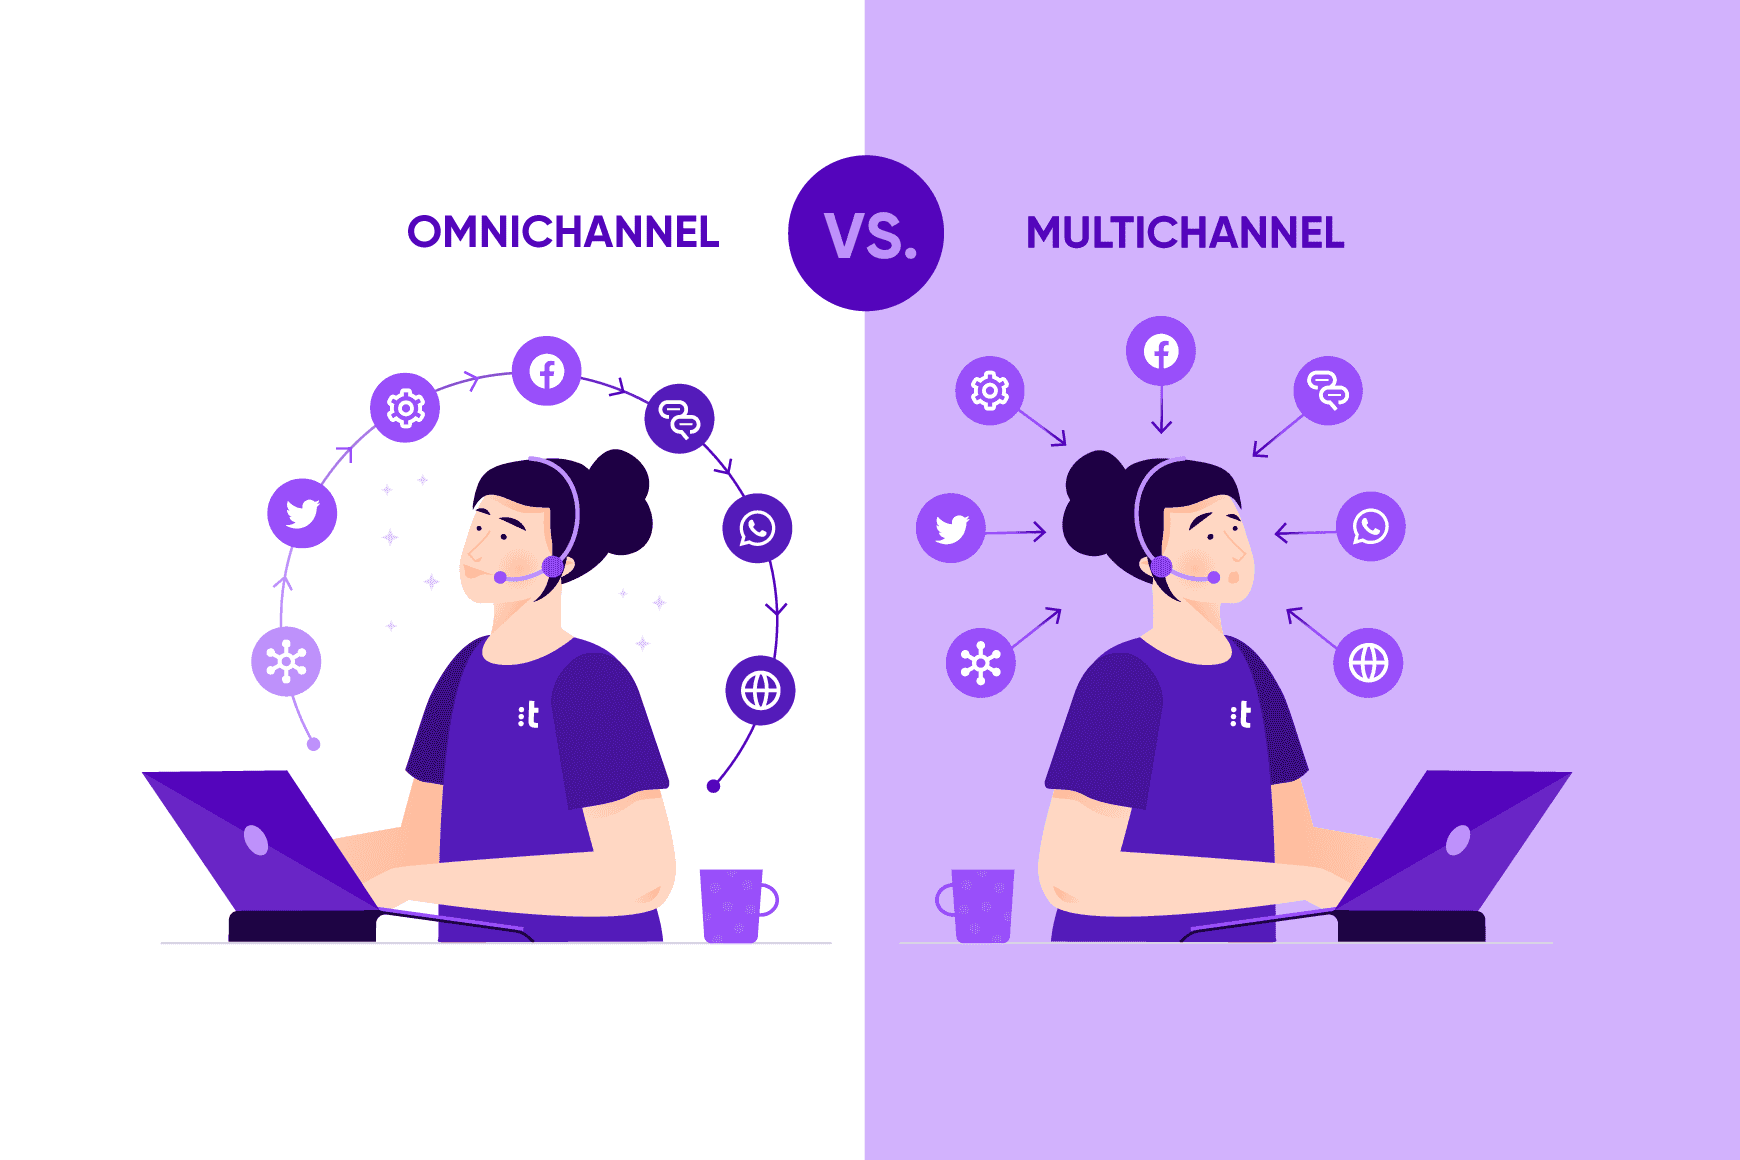 What’s the difference between omnichannel and multichannel customer support?